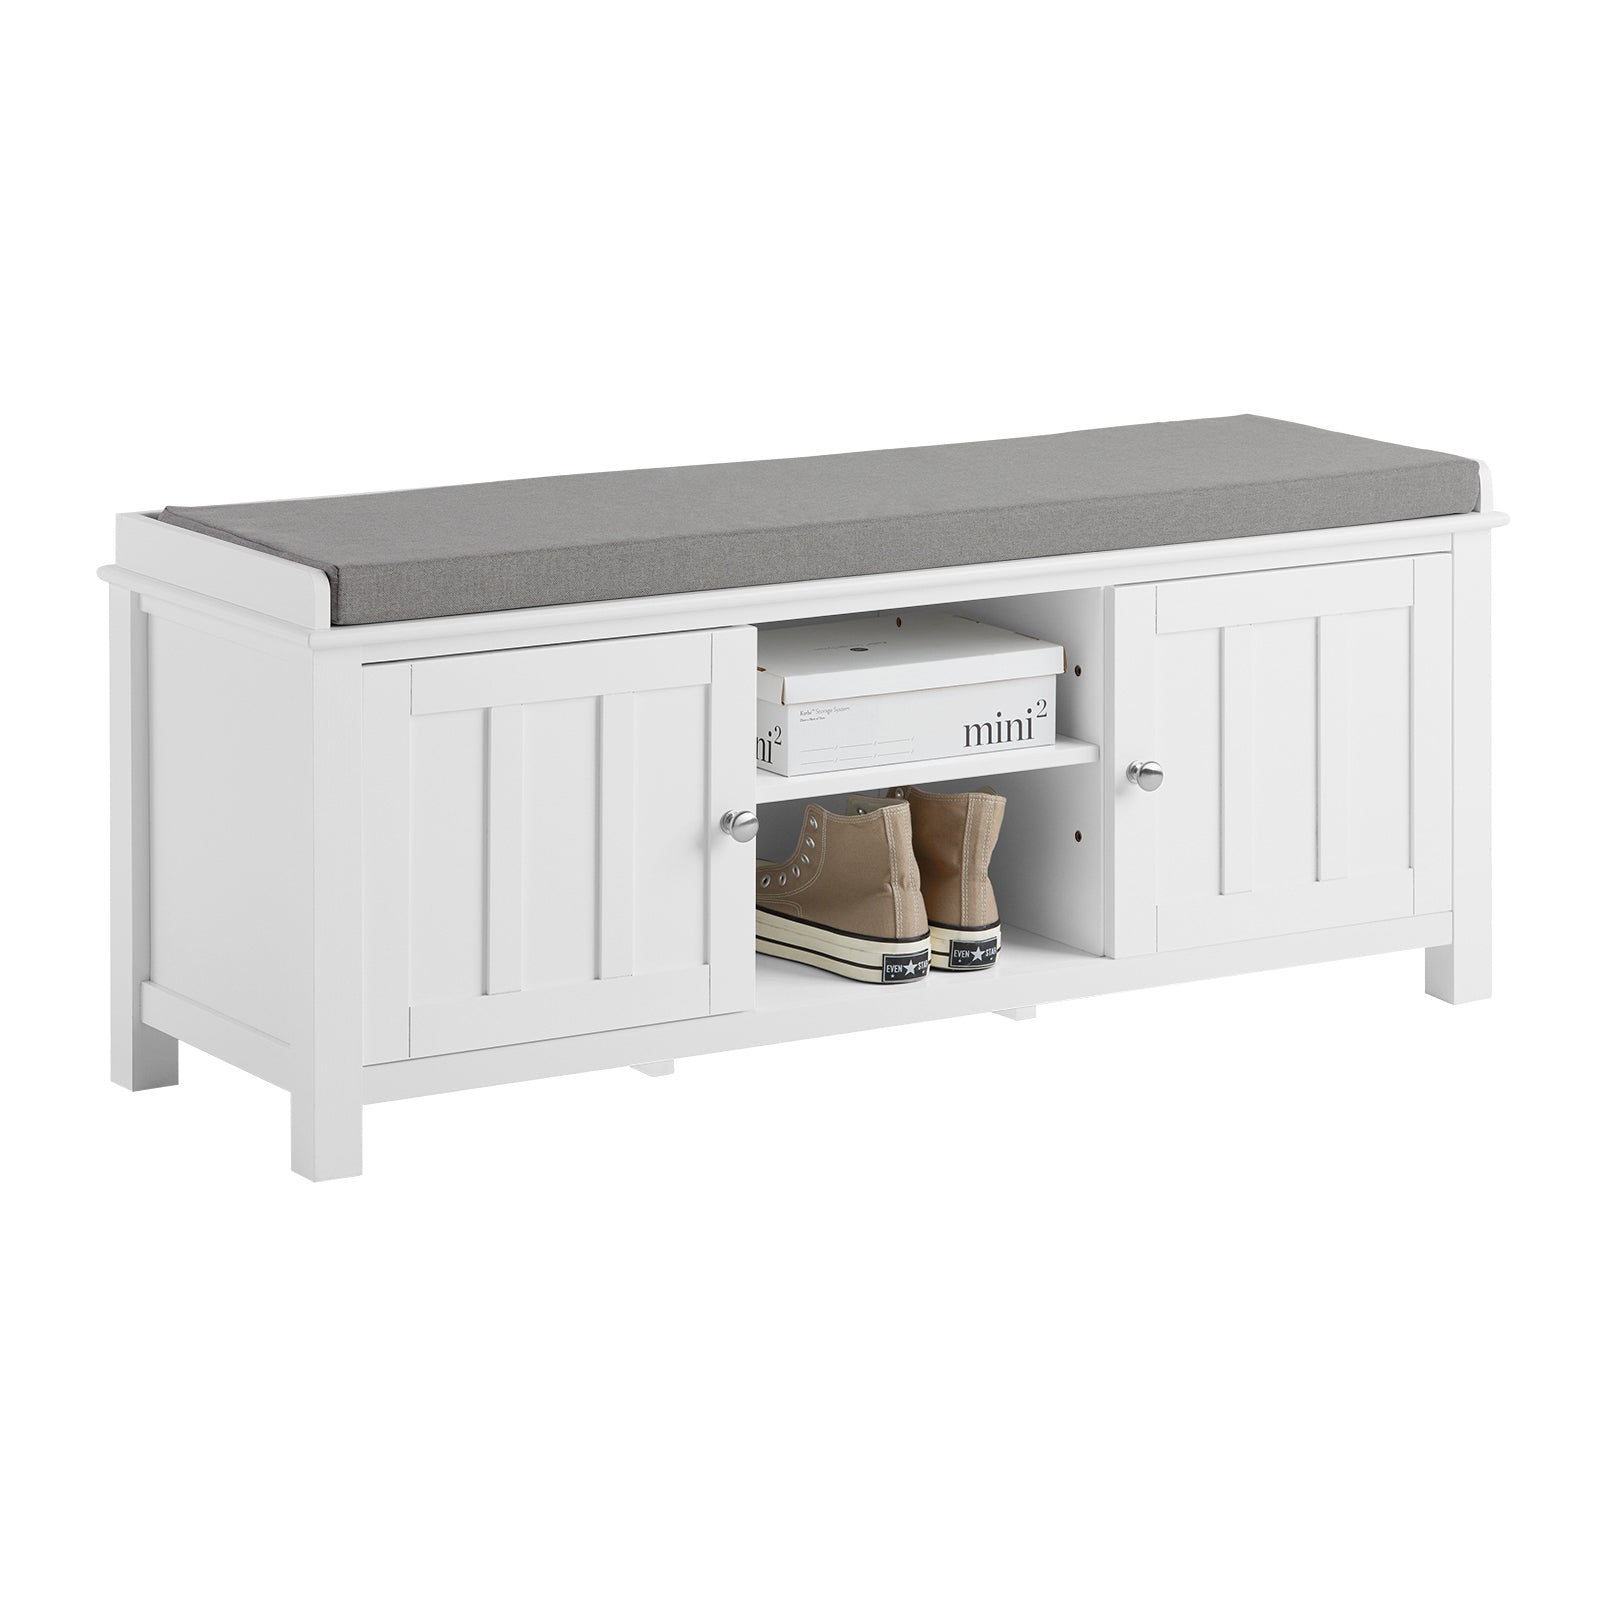 SoBuy FSR35-W White Storage Bench with 2 Doors & Removable Seat Cushion, Shoe Cabinet Shoe Bench